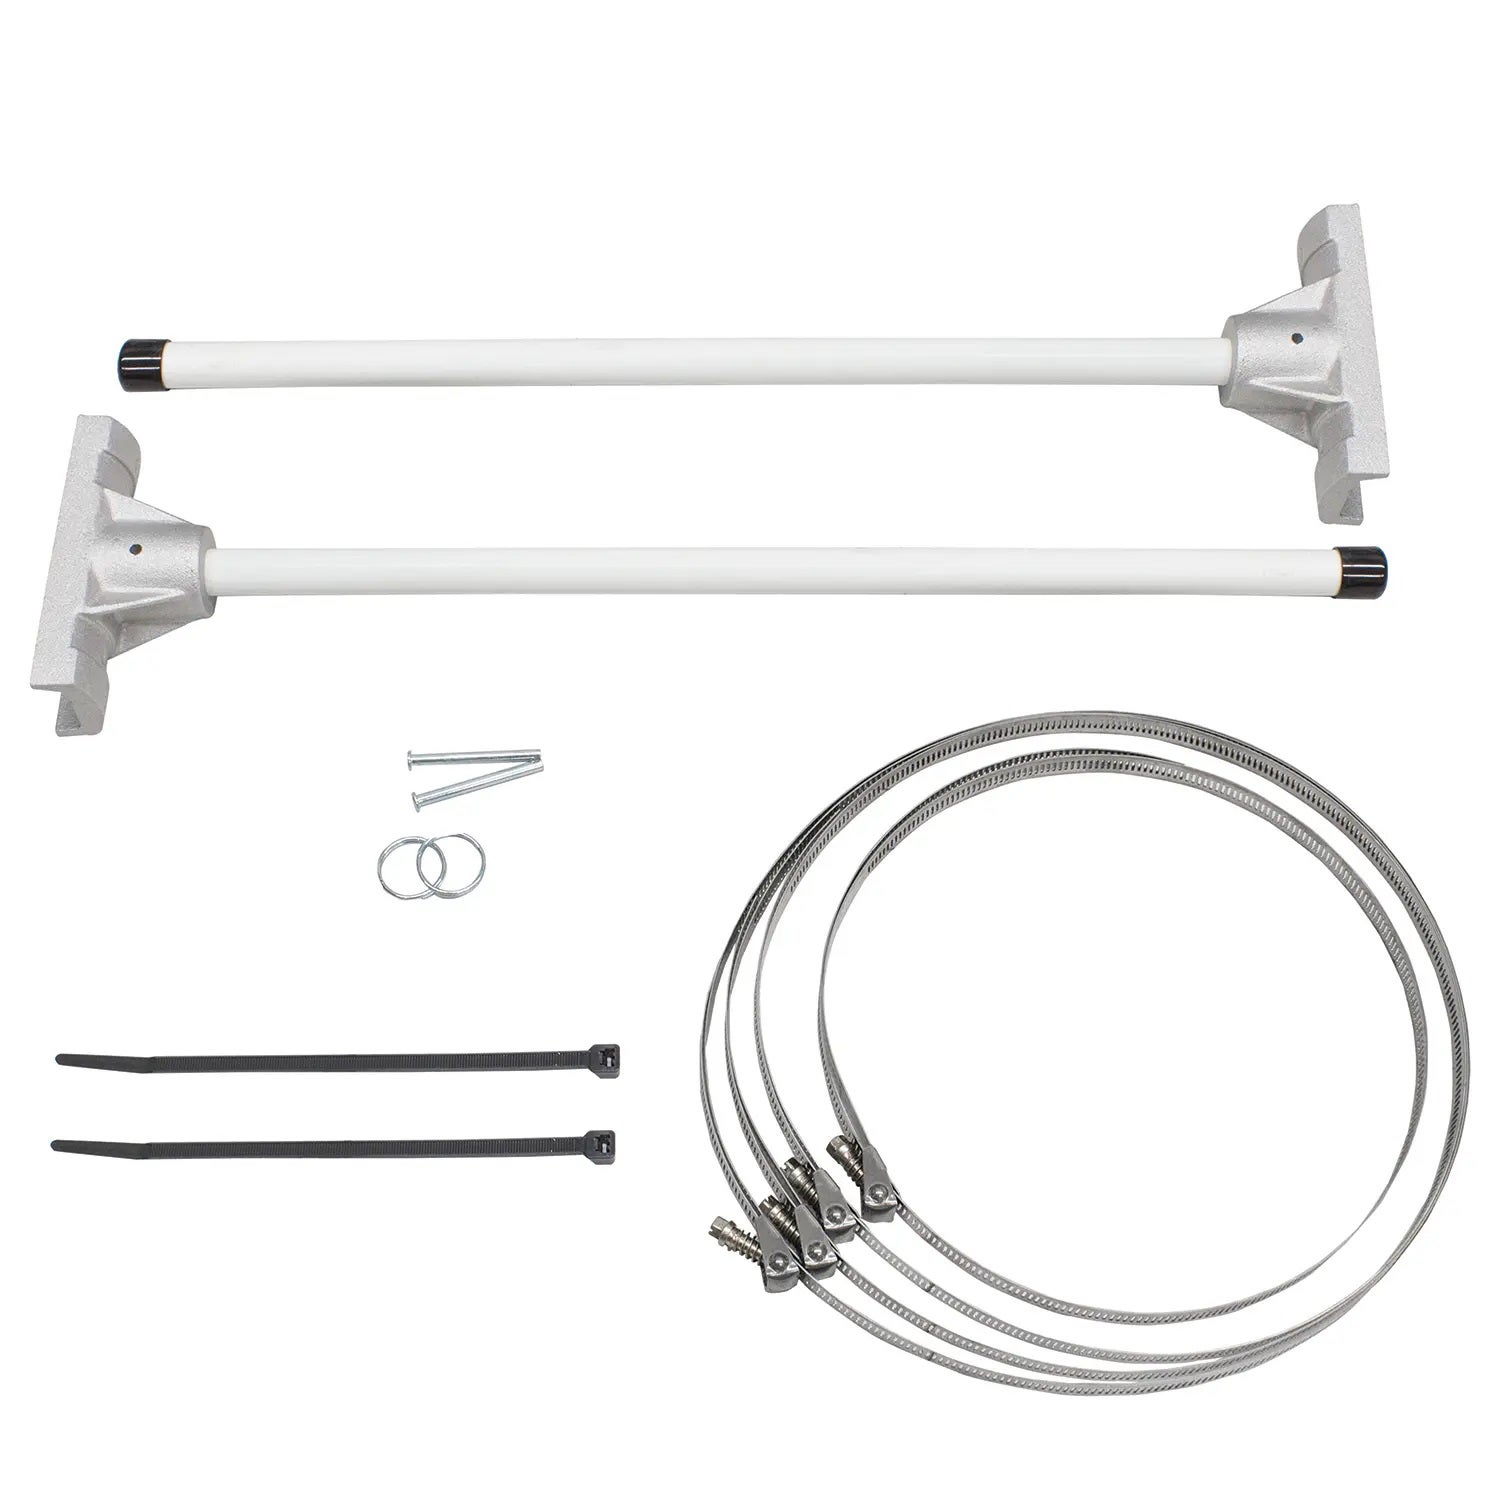 <strong>Pole Banner Kit Includes:</Strong><br>• 2 Poles<br>• 2 Brackets<br>• Assembly Hardware